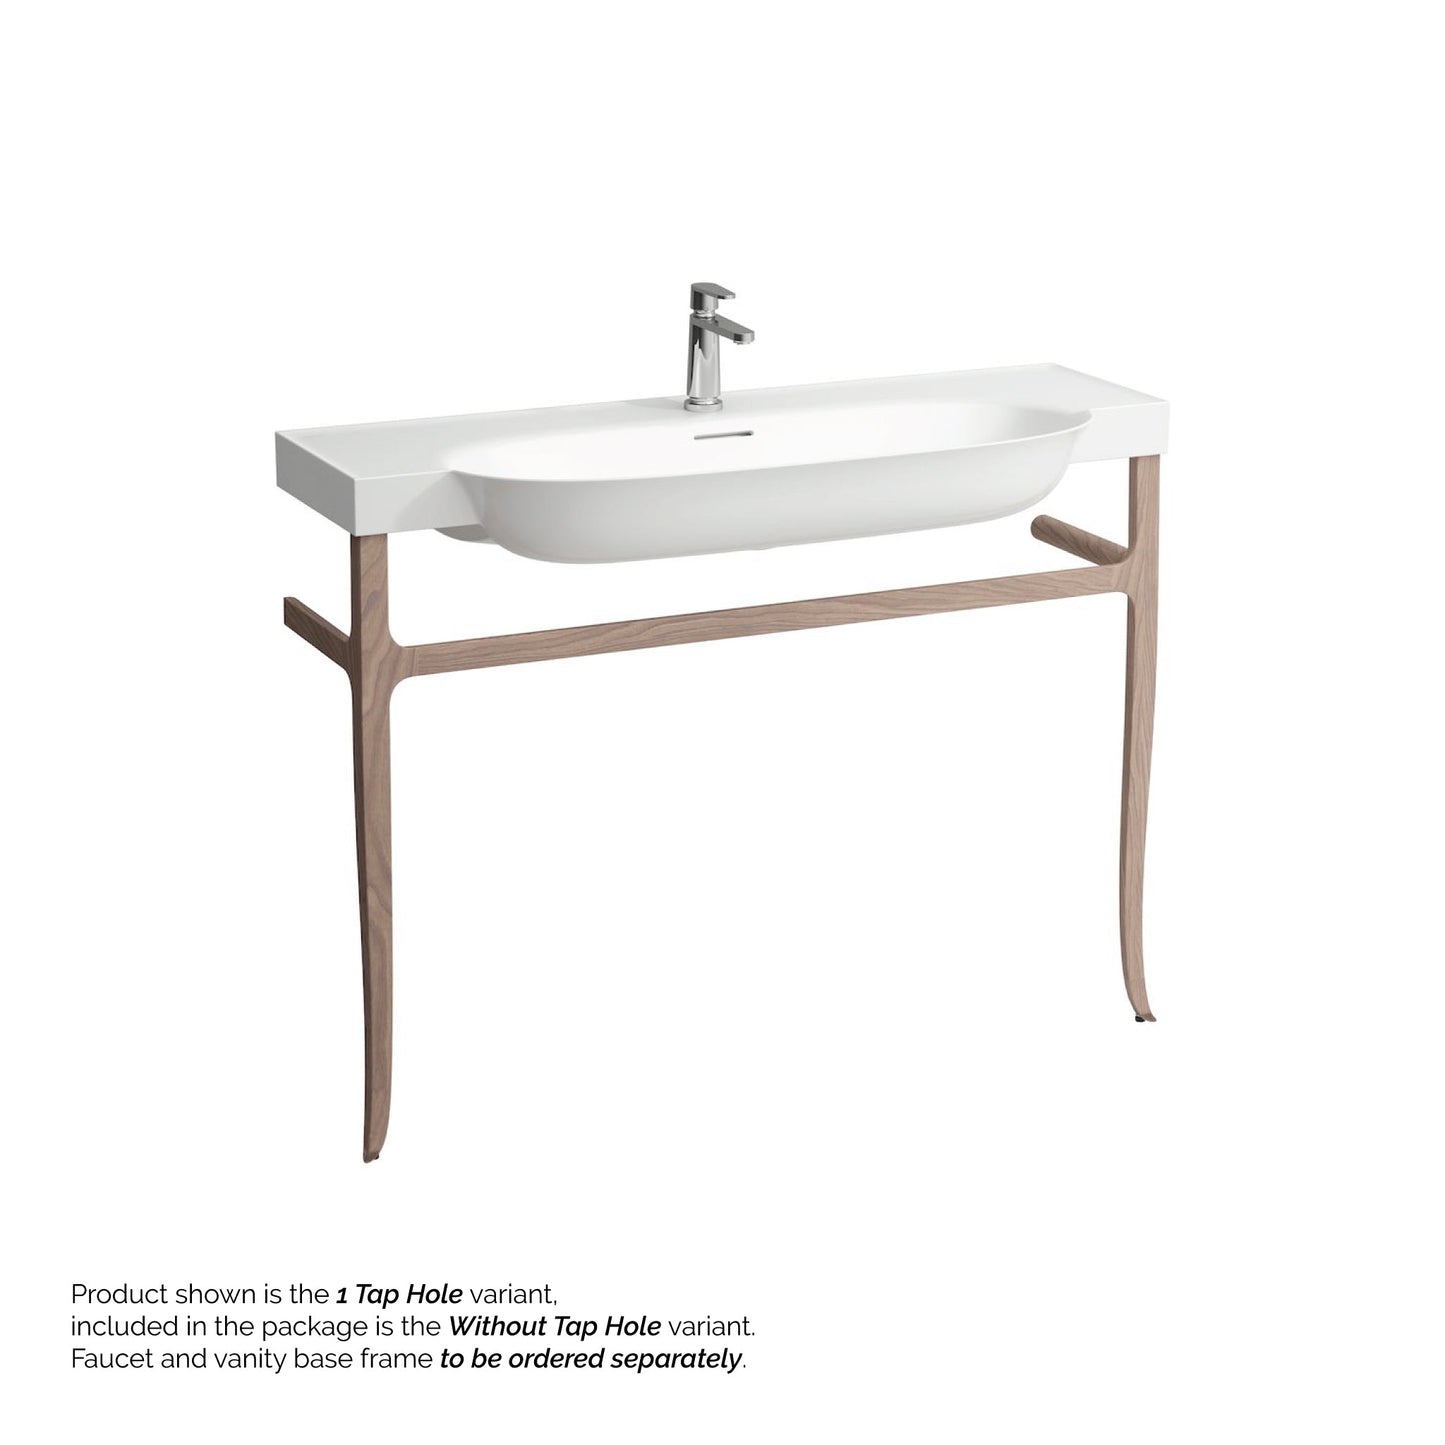 Laufen New Classic 47" x 19" White Ceramic Wall-Mounted Bathroom Sink Without Faucet Hole